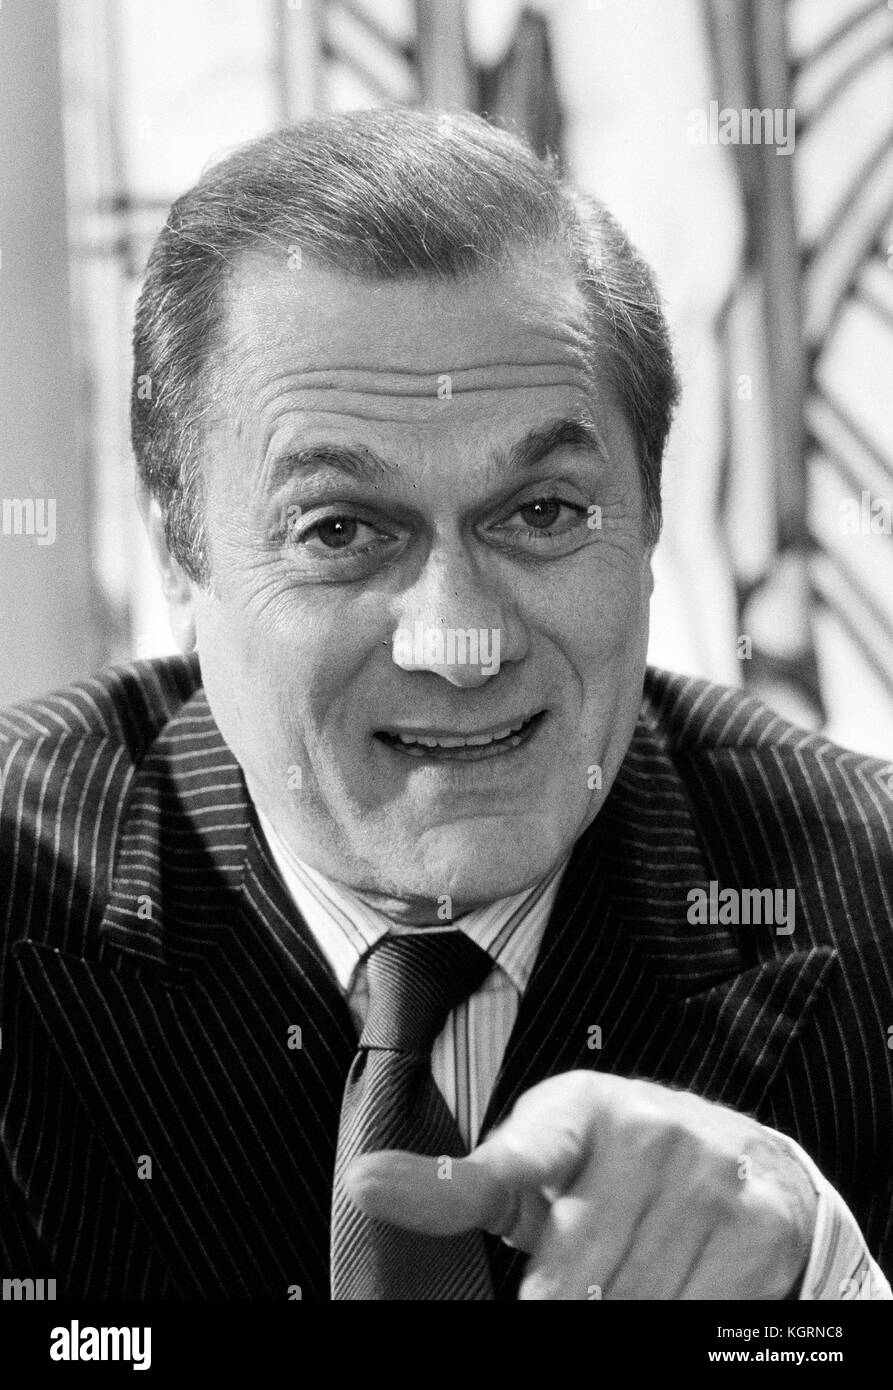 Tony curtis Black and White Stock Photos & Images - Alamy